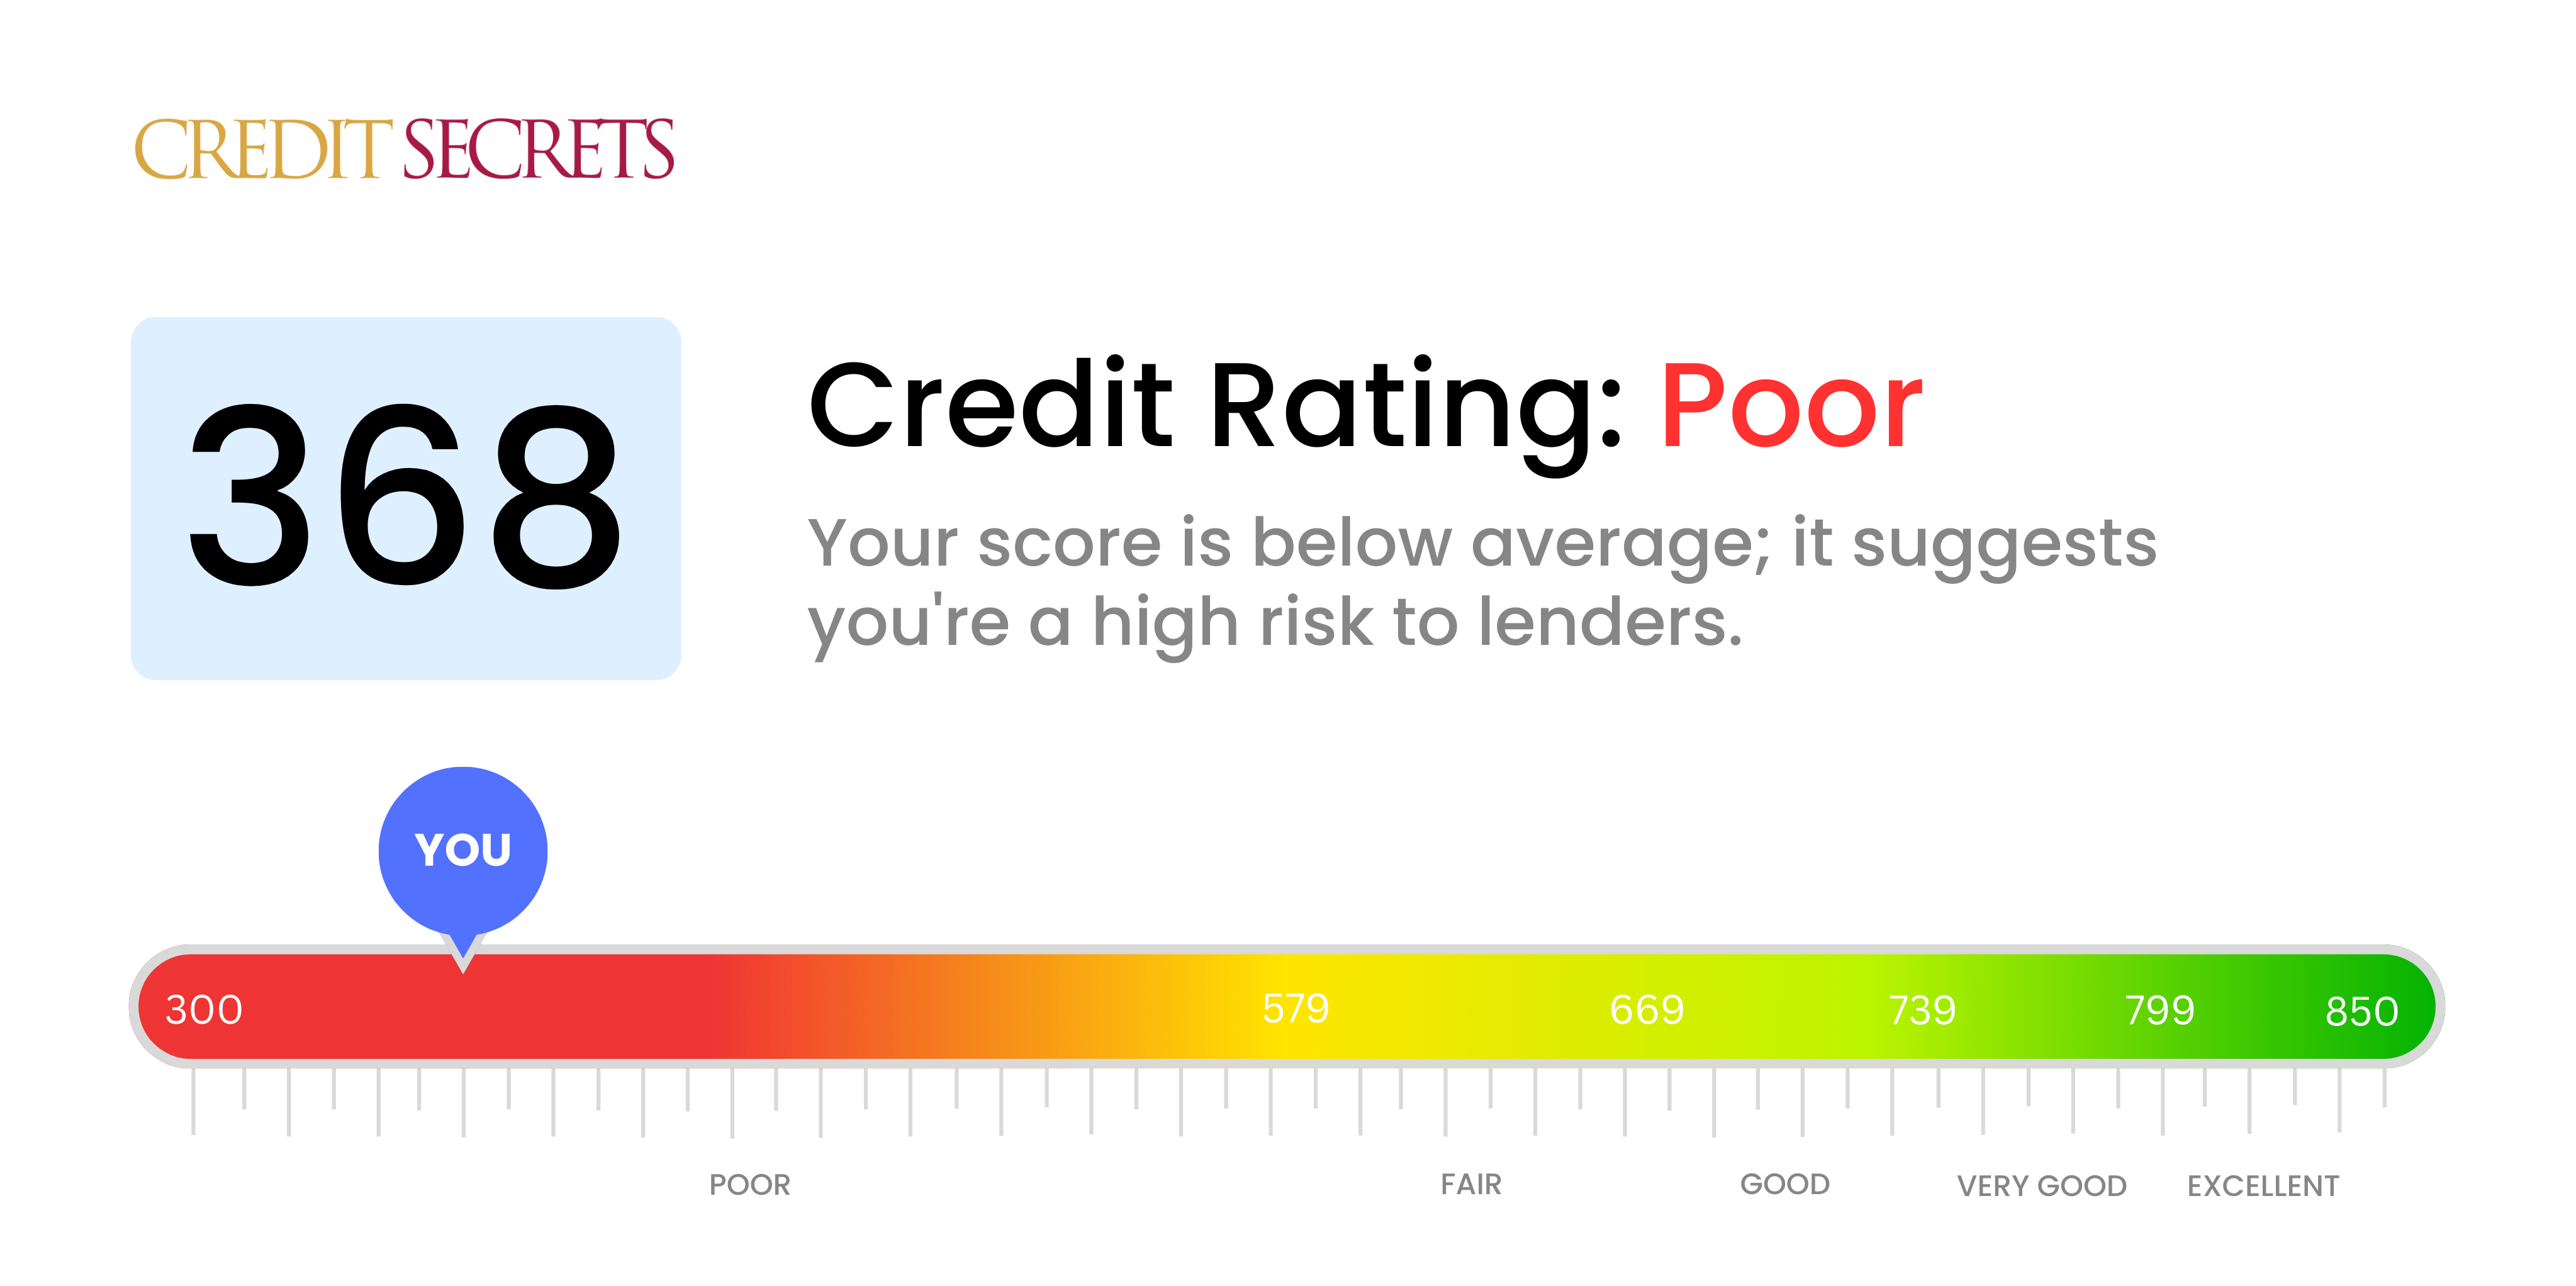 Is 368 a good credit score?